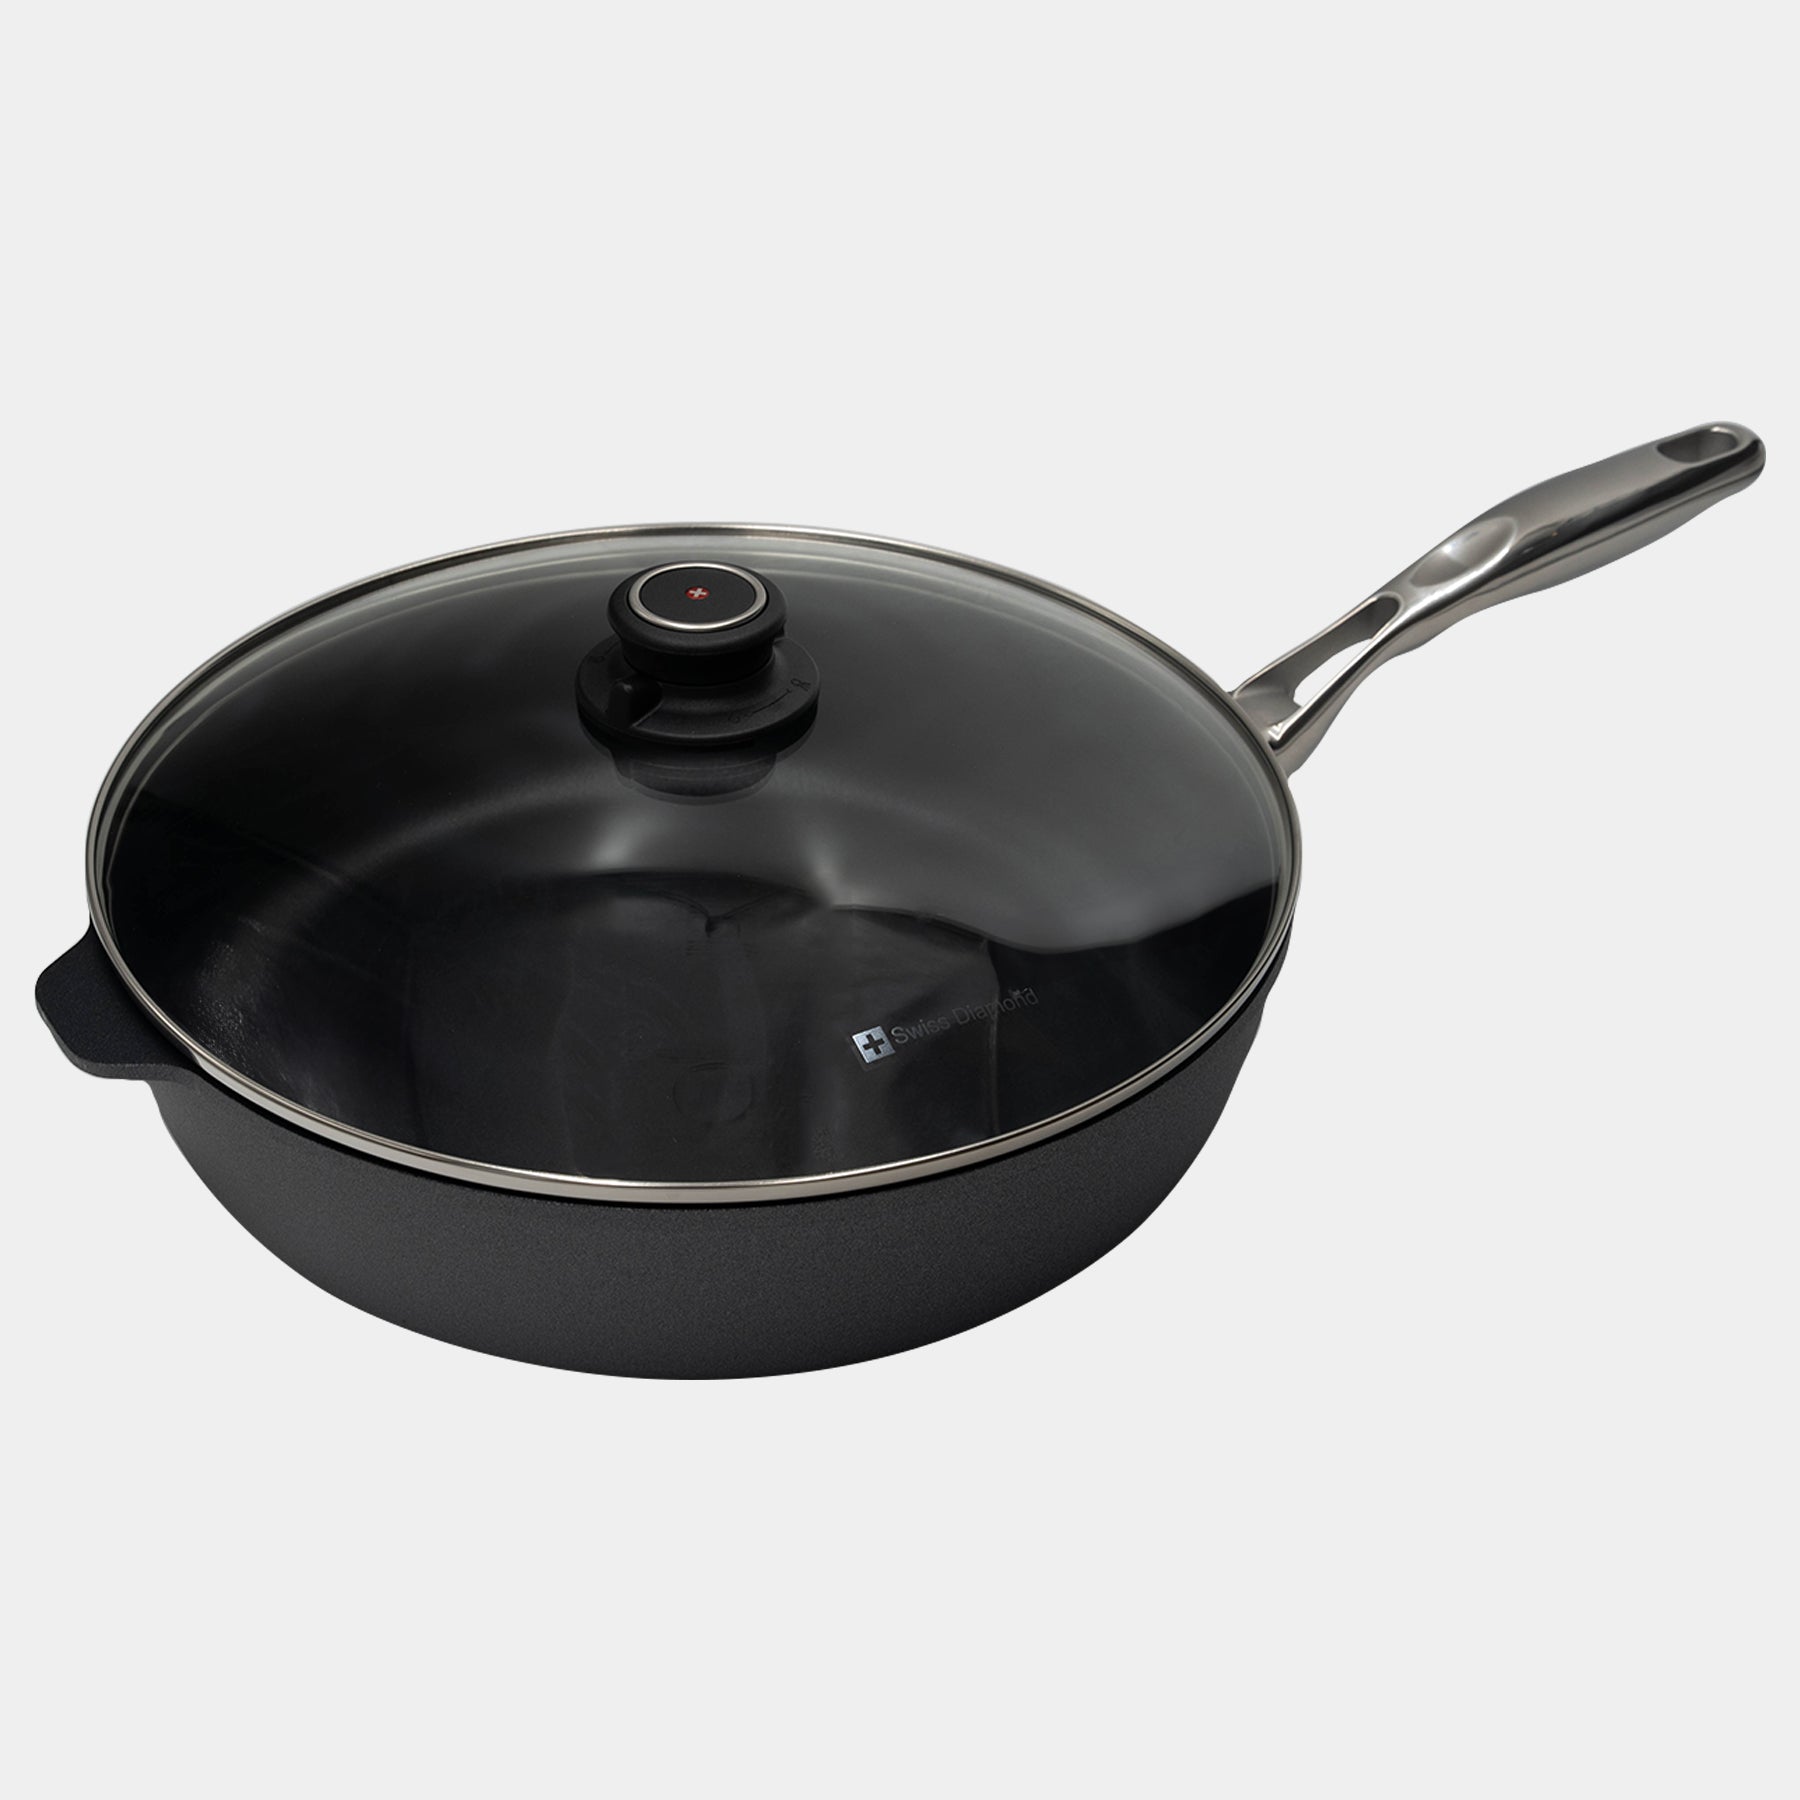 HD Nonstick 5.8 qt Saute Pan with Glass Lid - Induction